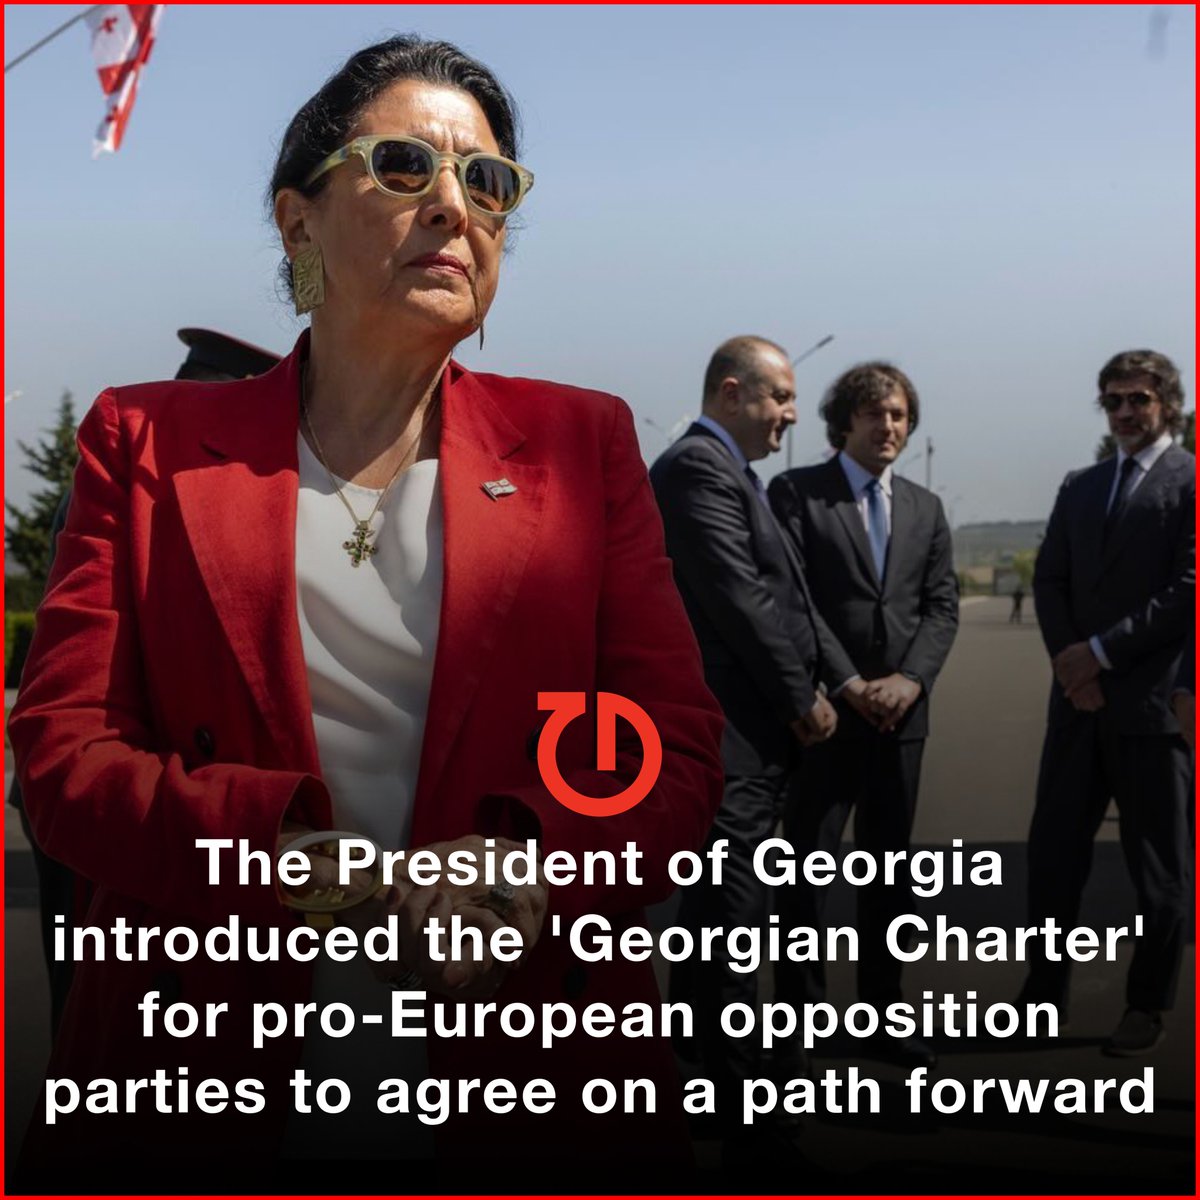 🇬🇪 Today, the President of Georgia introduced a new plan called the 'Georgian Charter' for pro-European opposition parties to agree on the country's path forward

⭕ So far, six opposition parties have agreed to sign the Charter

#Georgia #RussianLaw #NoToRussianLaw #Tbilisi